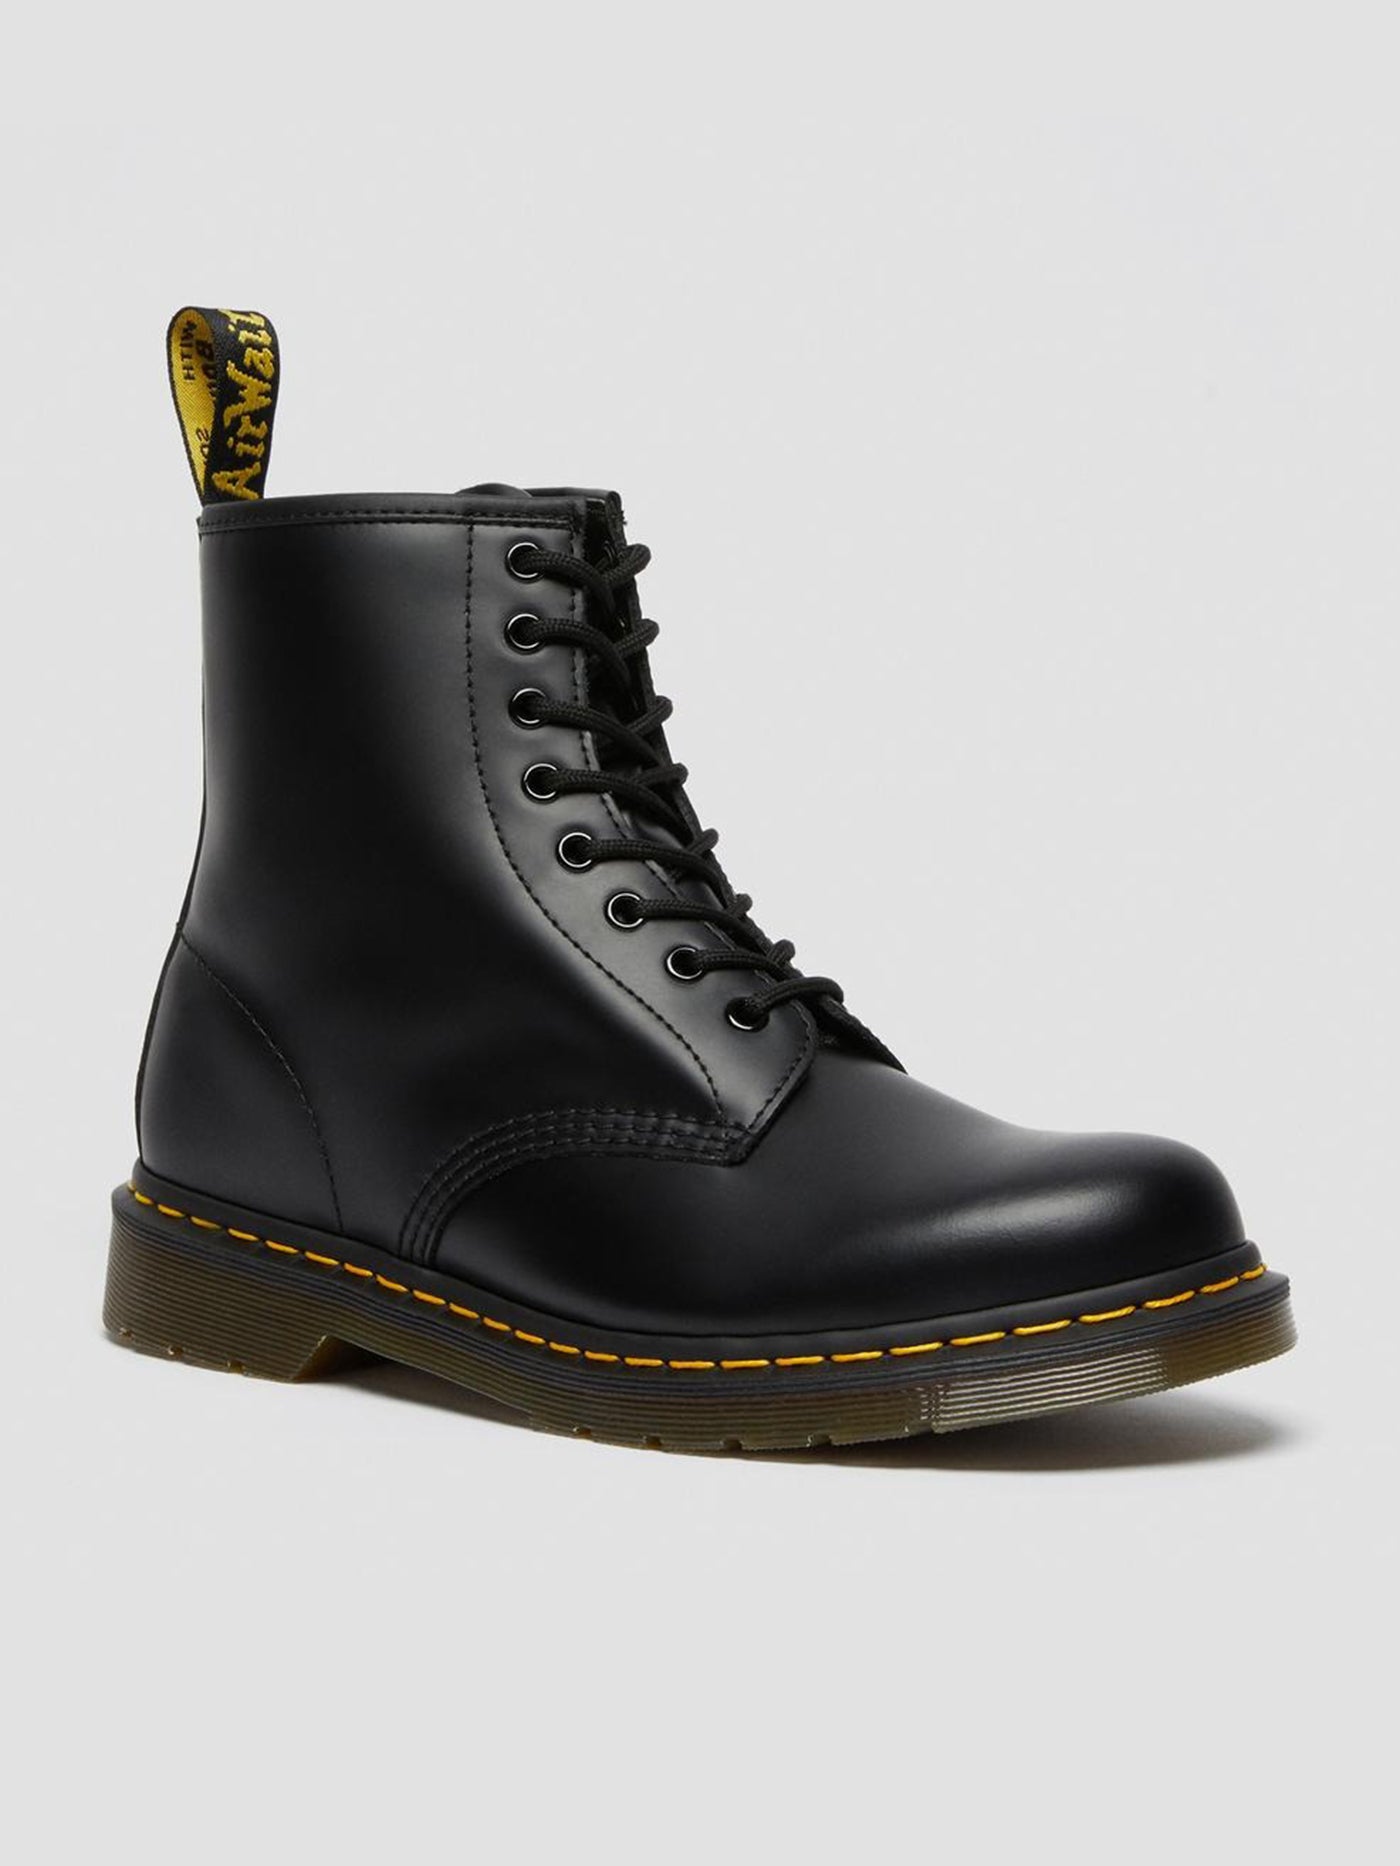 Dr. Martens 1460 Smooth Black Boots